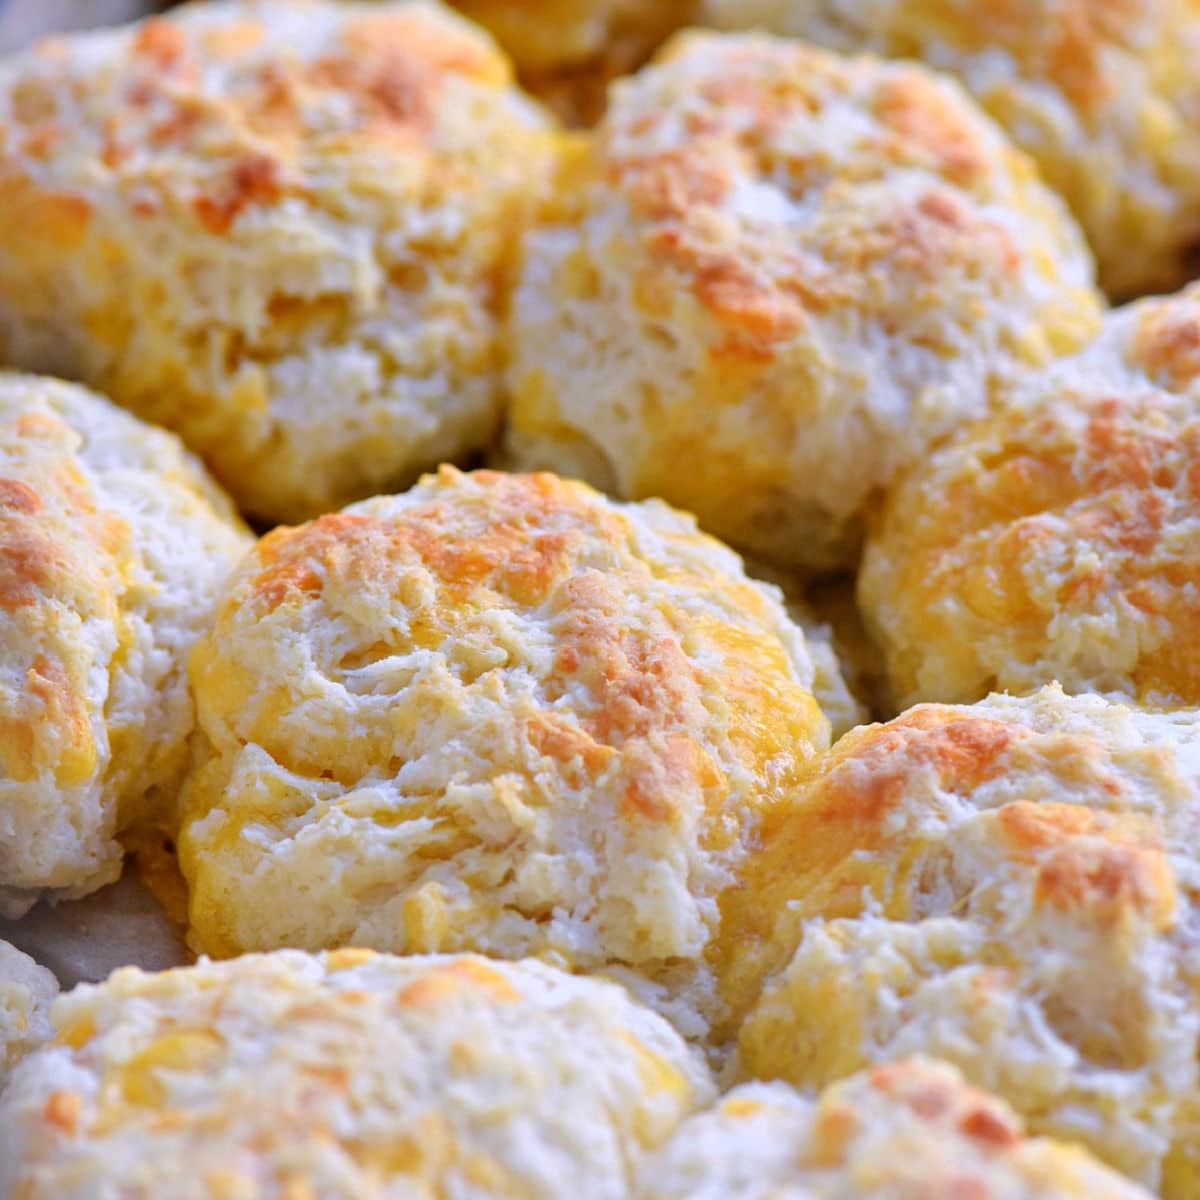 Red Lobster Cheddar Bay Biscuit Mix is back! We will be serving at  Thanksgiving (and many other meals) : r/Costco